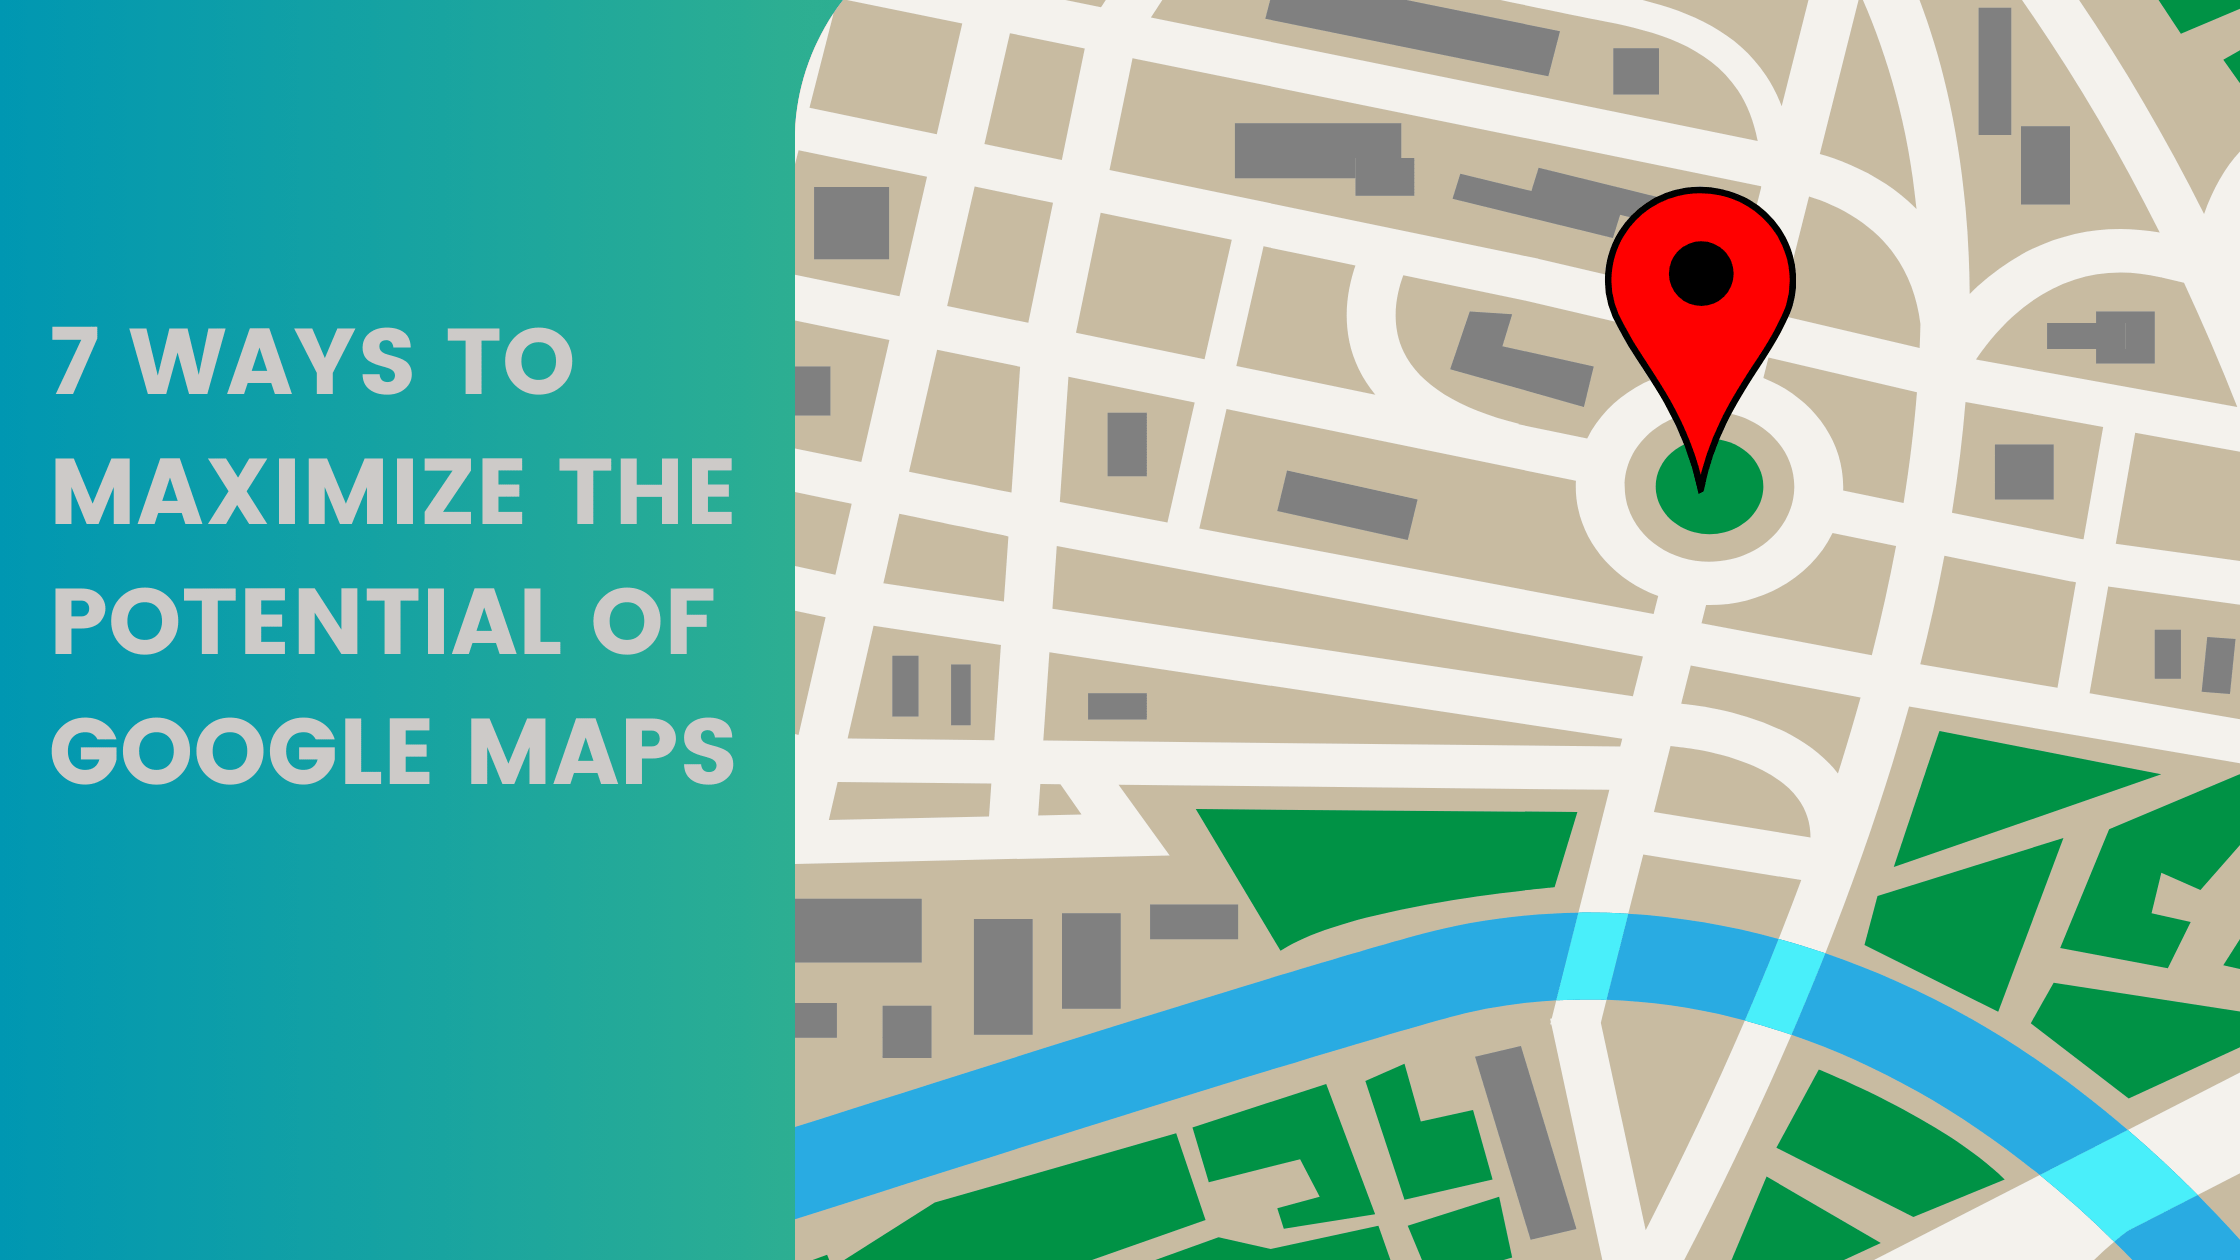 7 Ways to Maximize the Potential of Google Maps